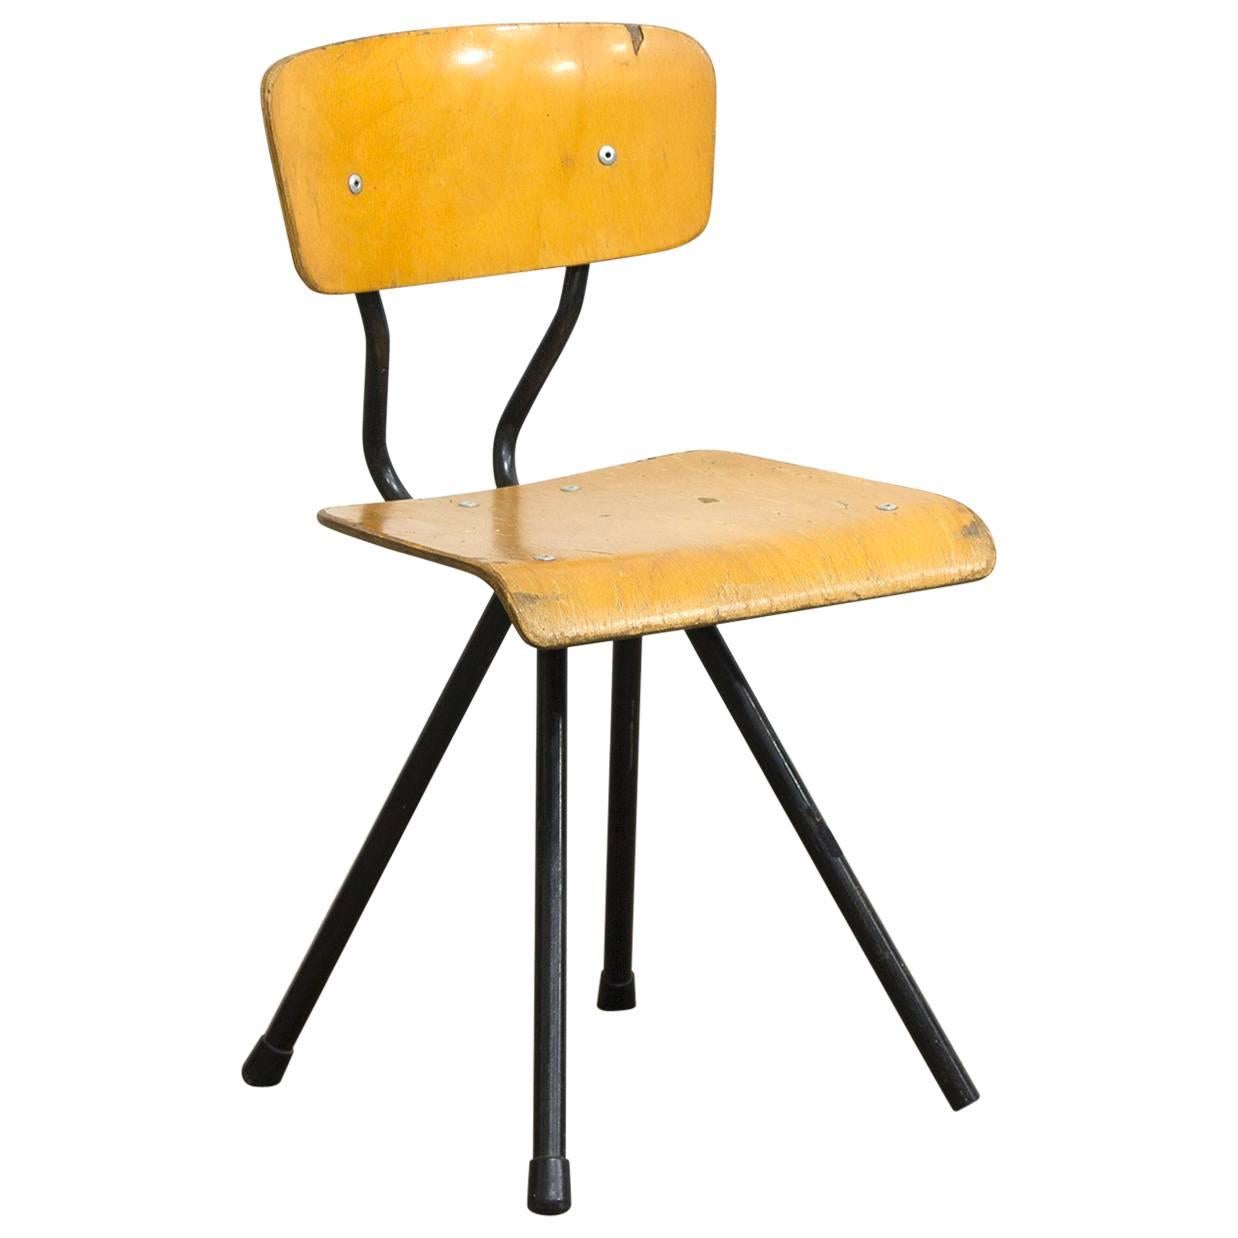 1960s Children Chair, Plywood and Metal